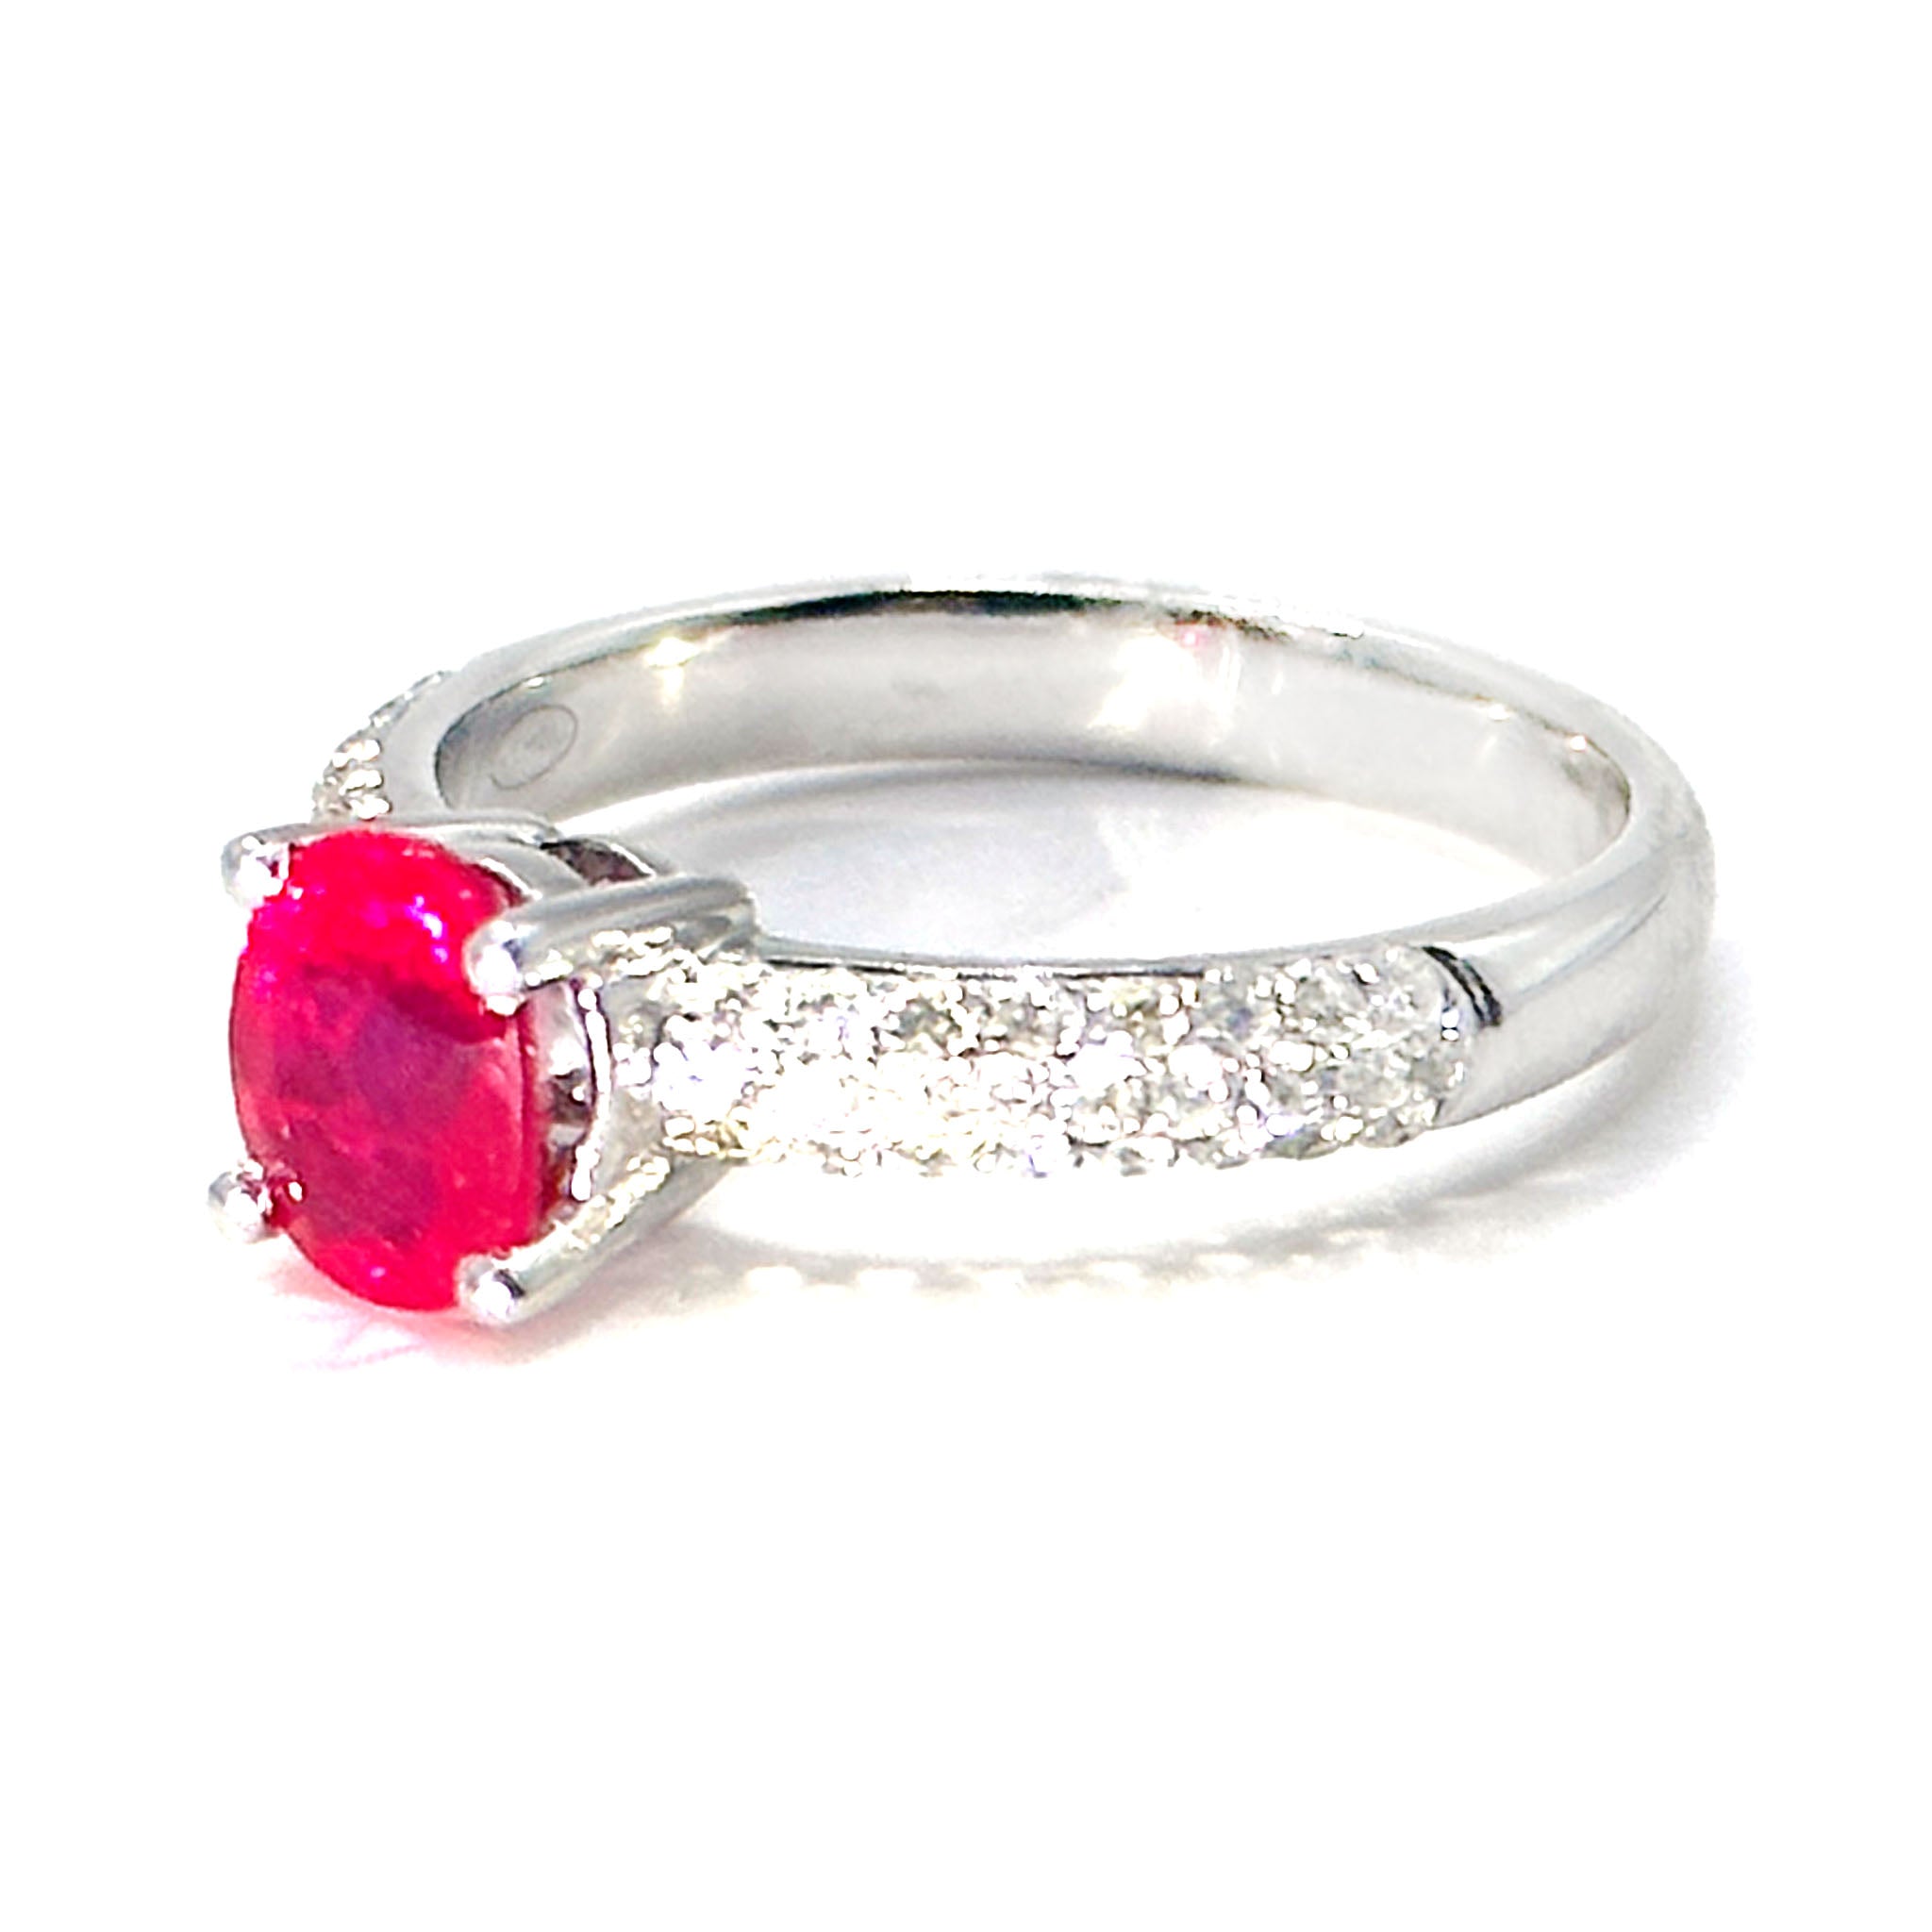 $8600 1.77Ct Oval Ruby and Pave Diamond Cocktail Ladies Ring 18Kt White Gold